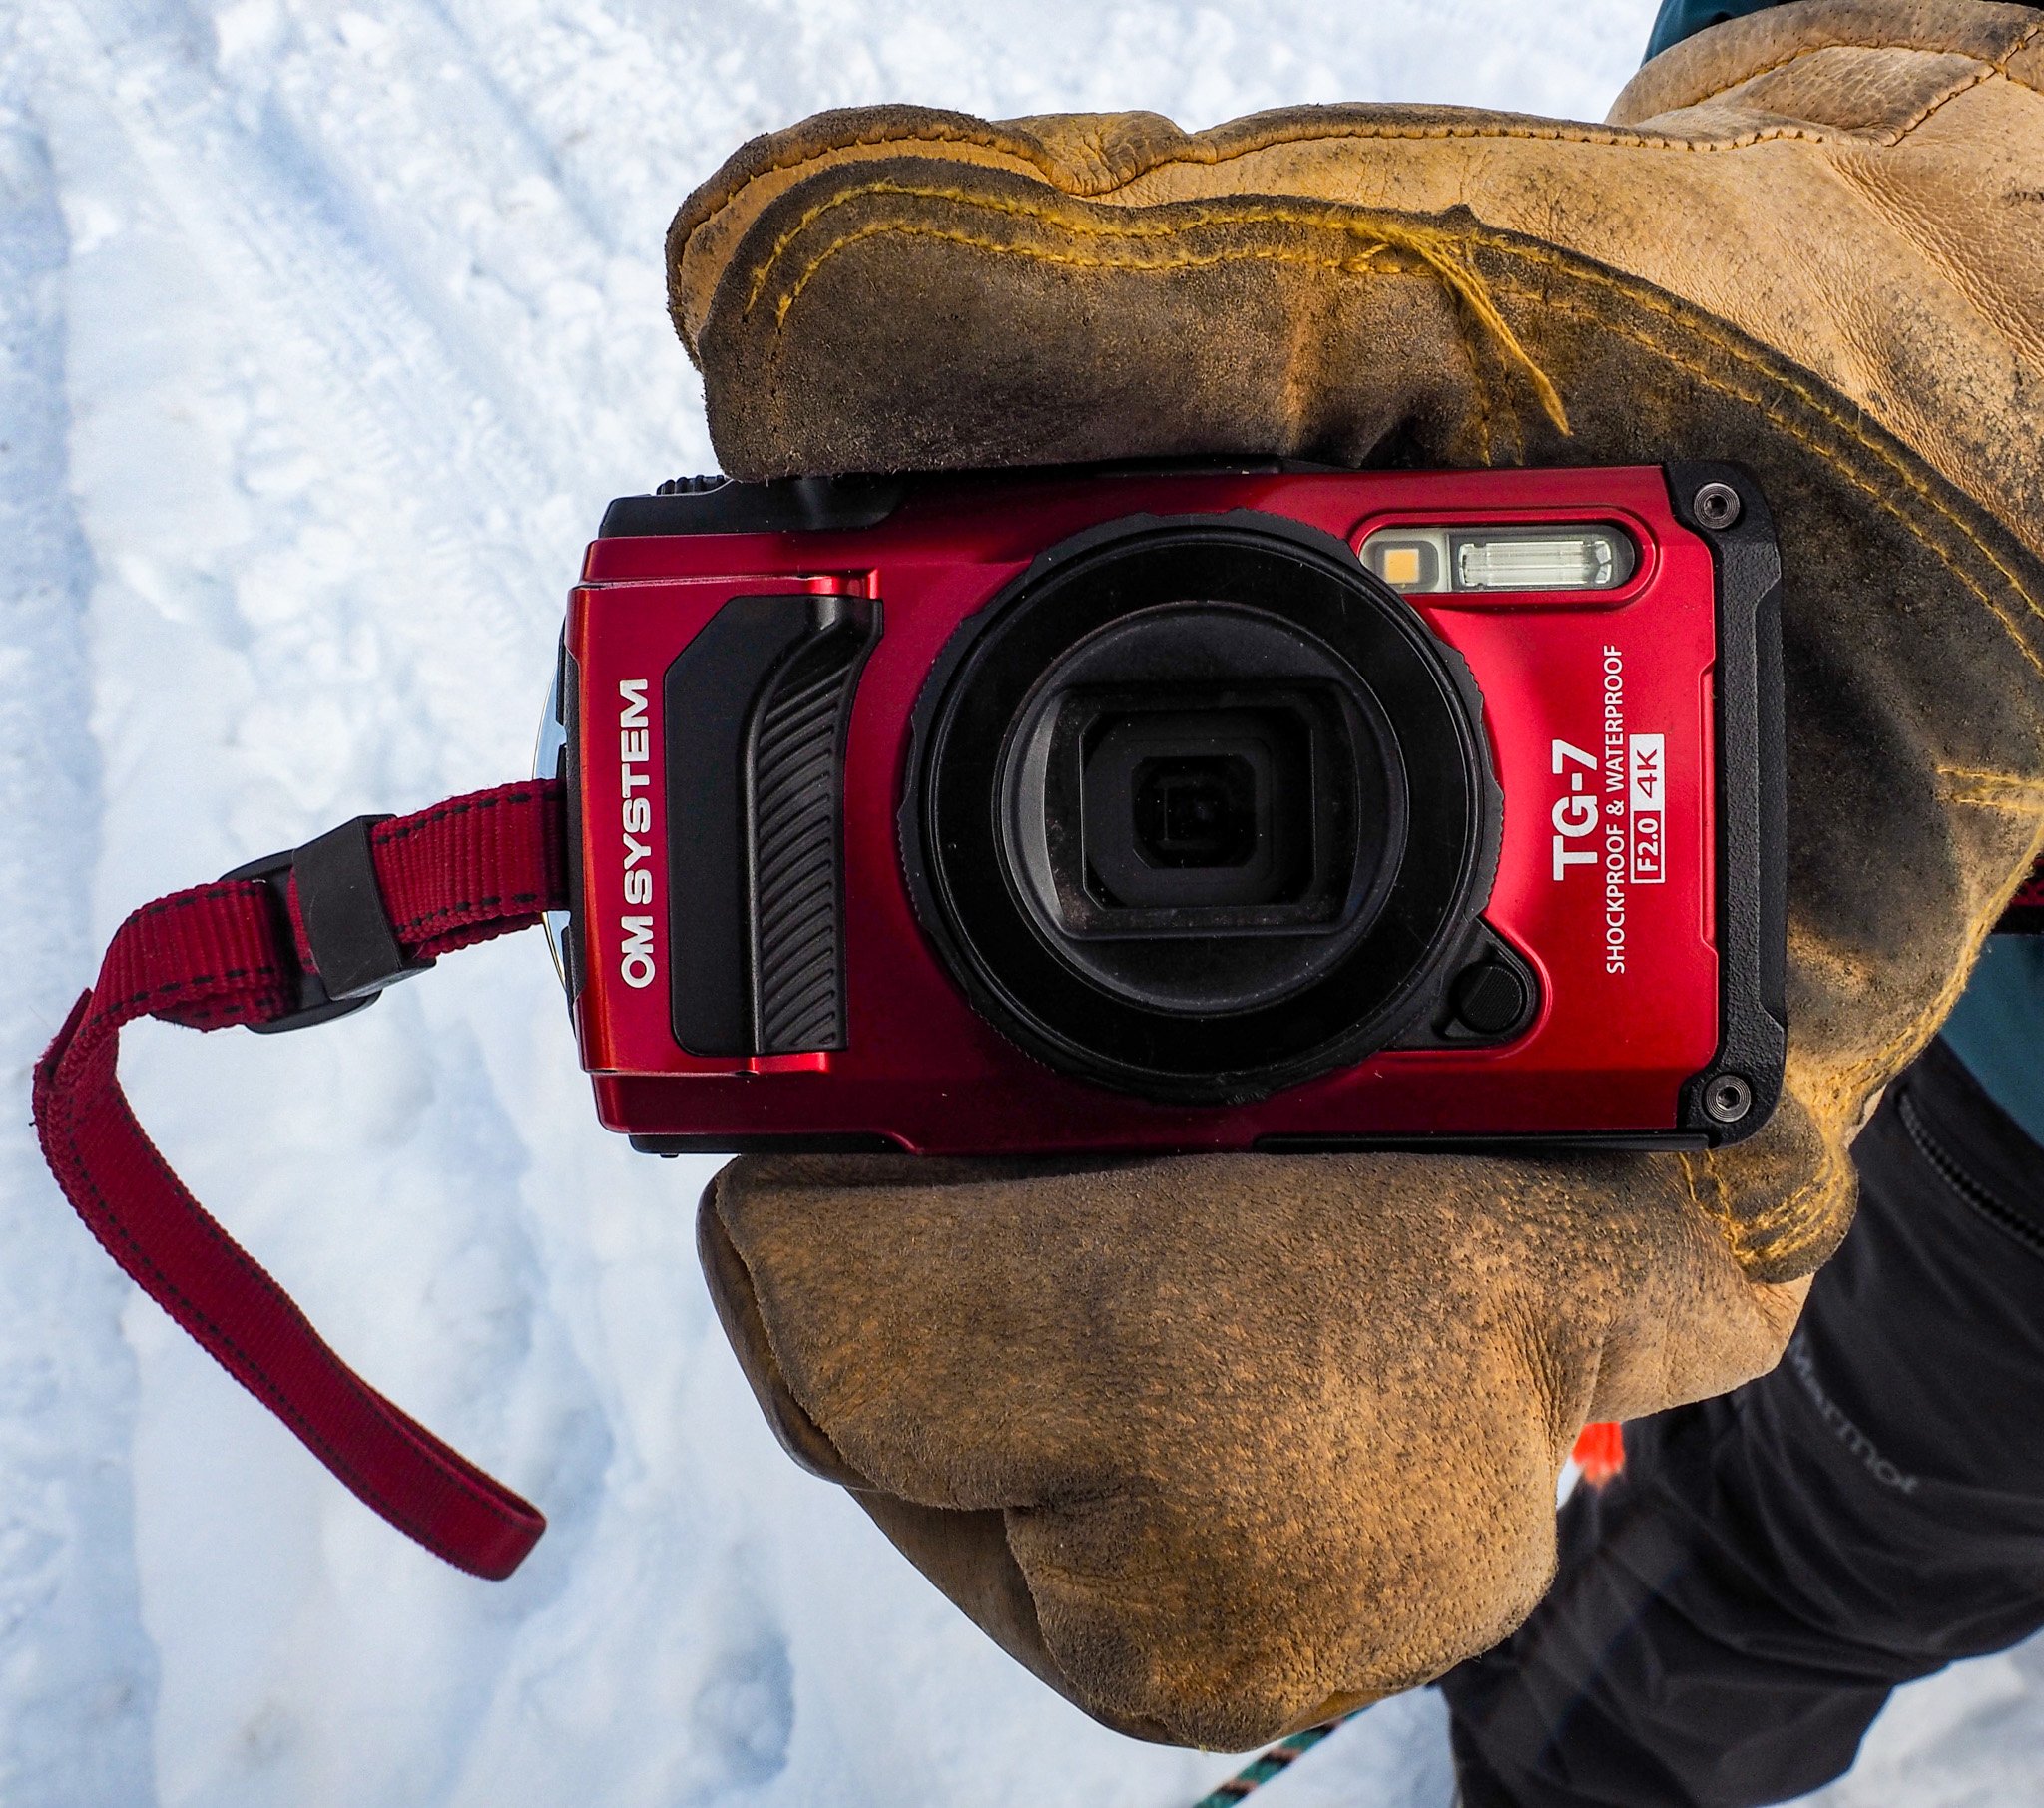 OM System TG-7 Rugged Camera Review